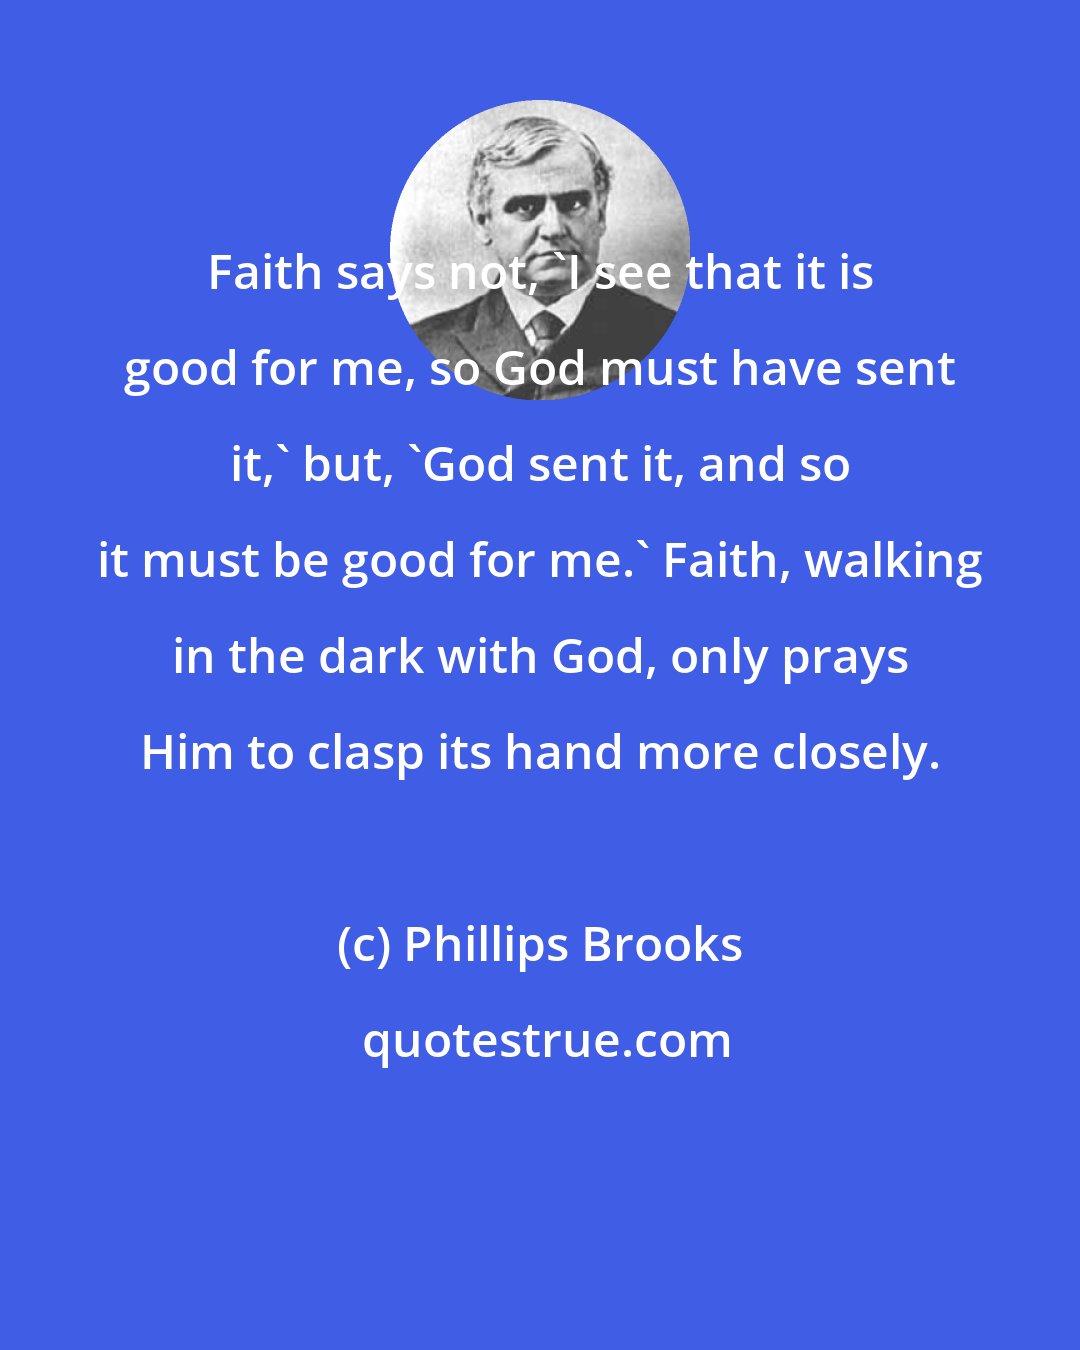 Phillips Brooks: Faith says not, 'I see that it is good for me, so God must have sent it,' but, 'God sent it, and so it must be good for me.' Faith, walking in the dark with God, only prays Him to clasp its hand more closely.